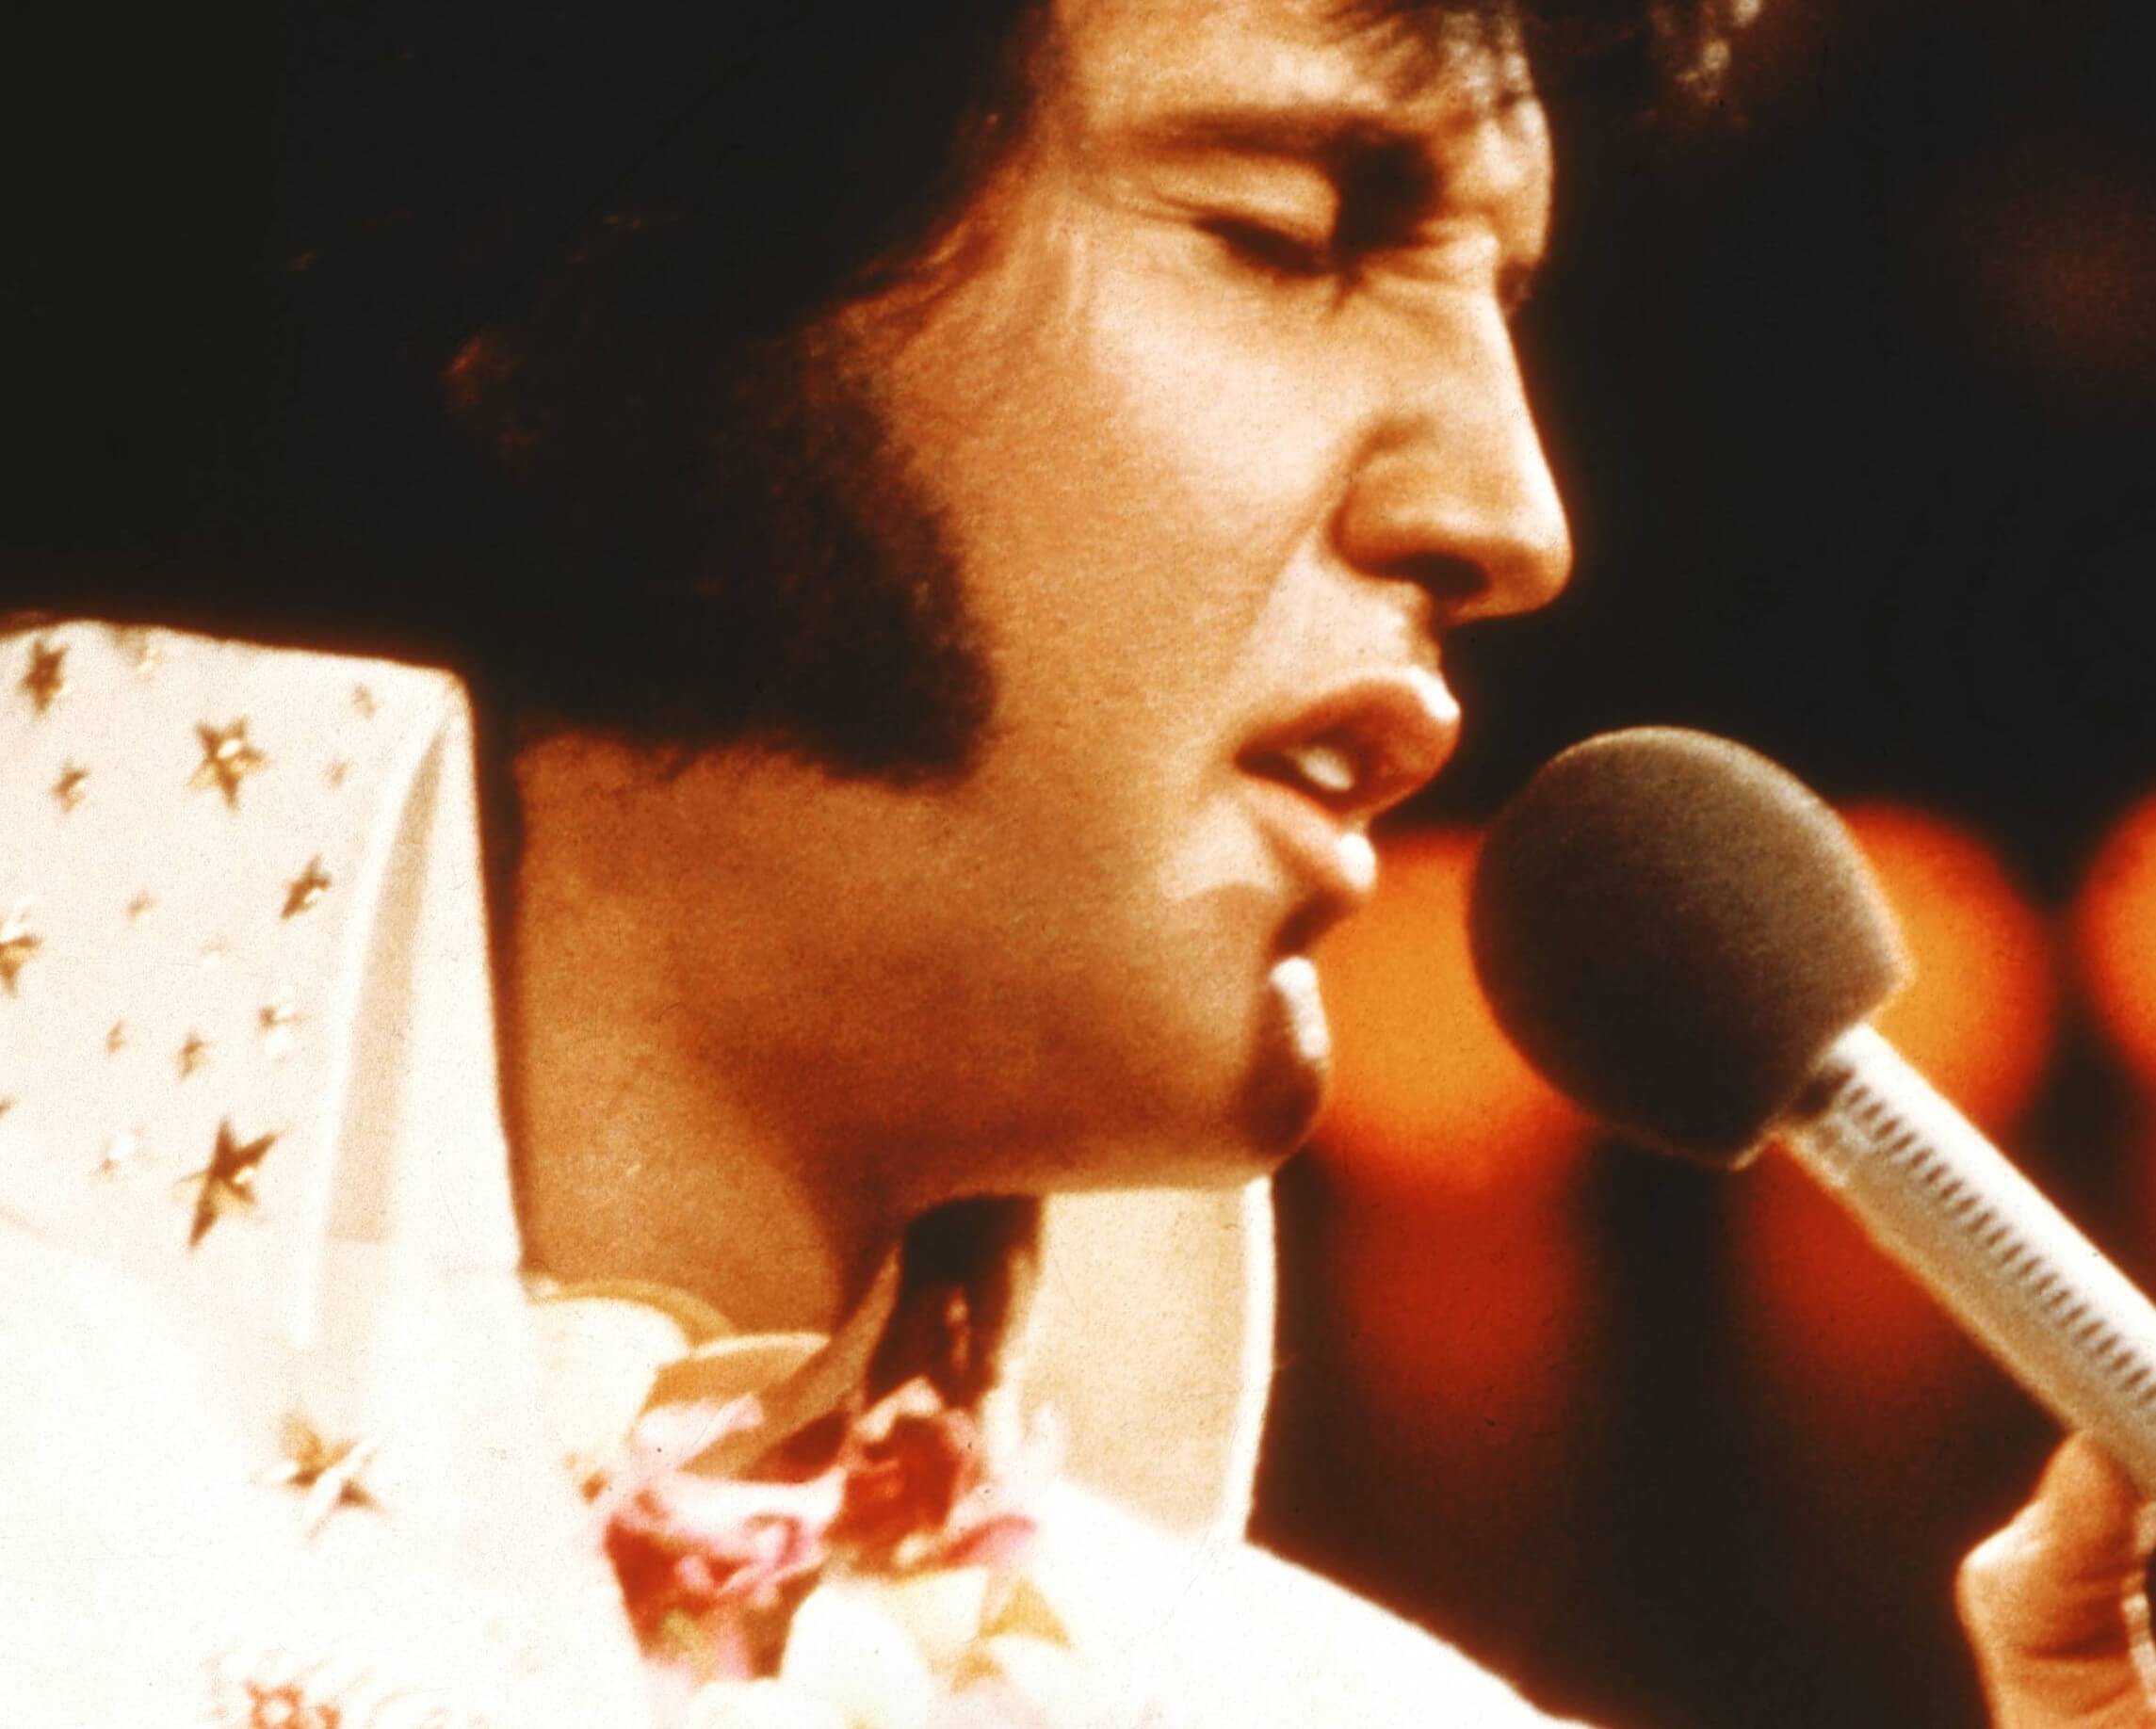 "Burning Love" singer Elvis Presley with a microphone